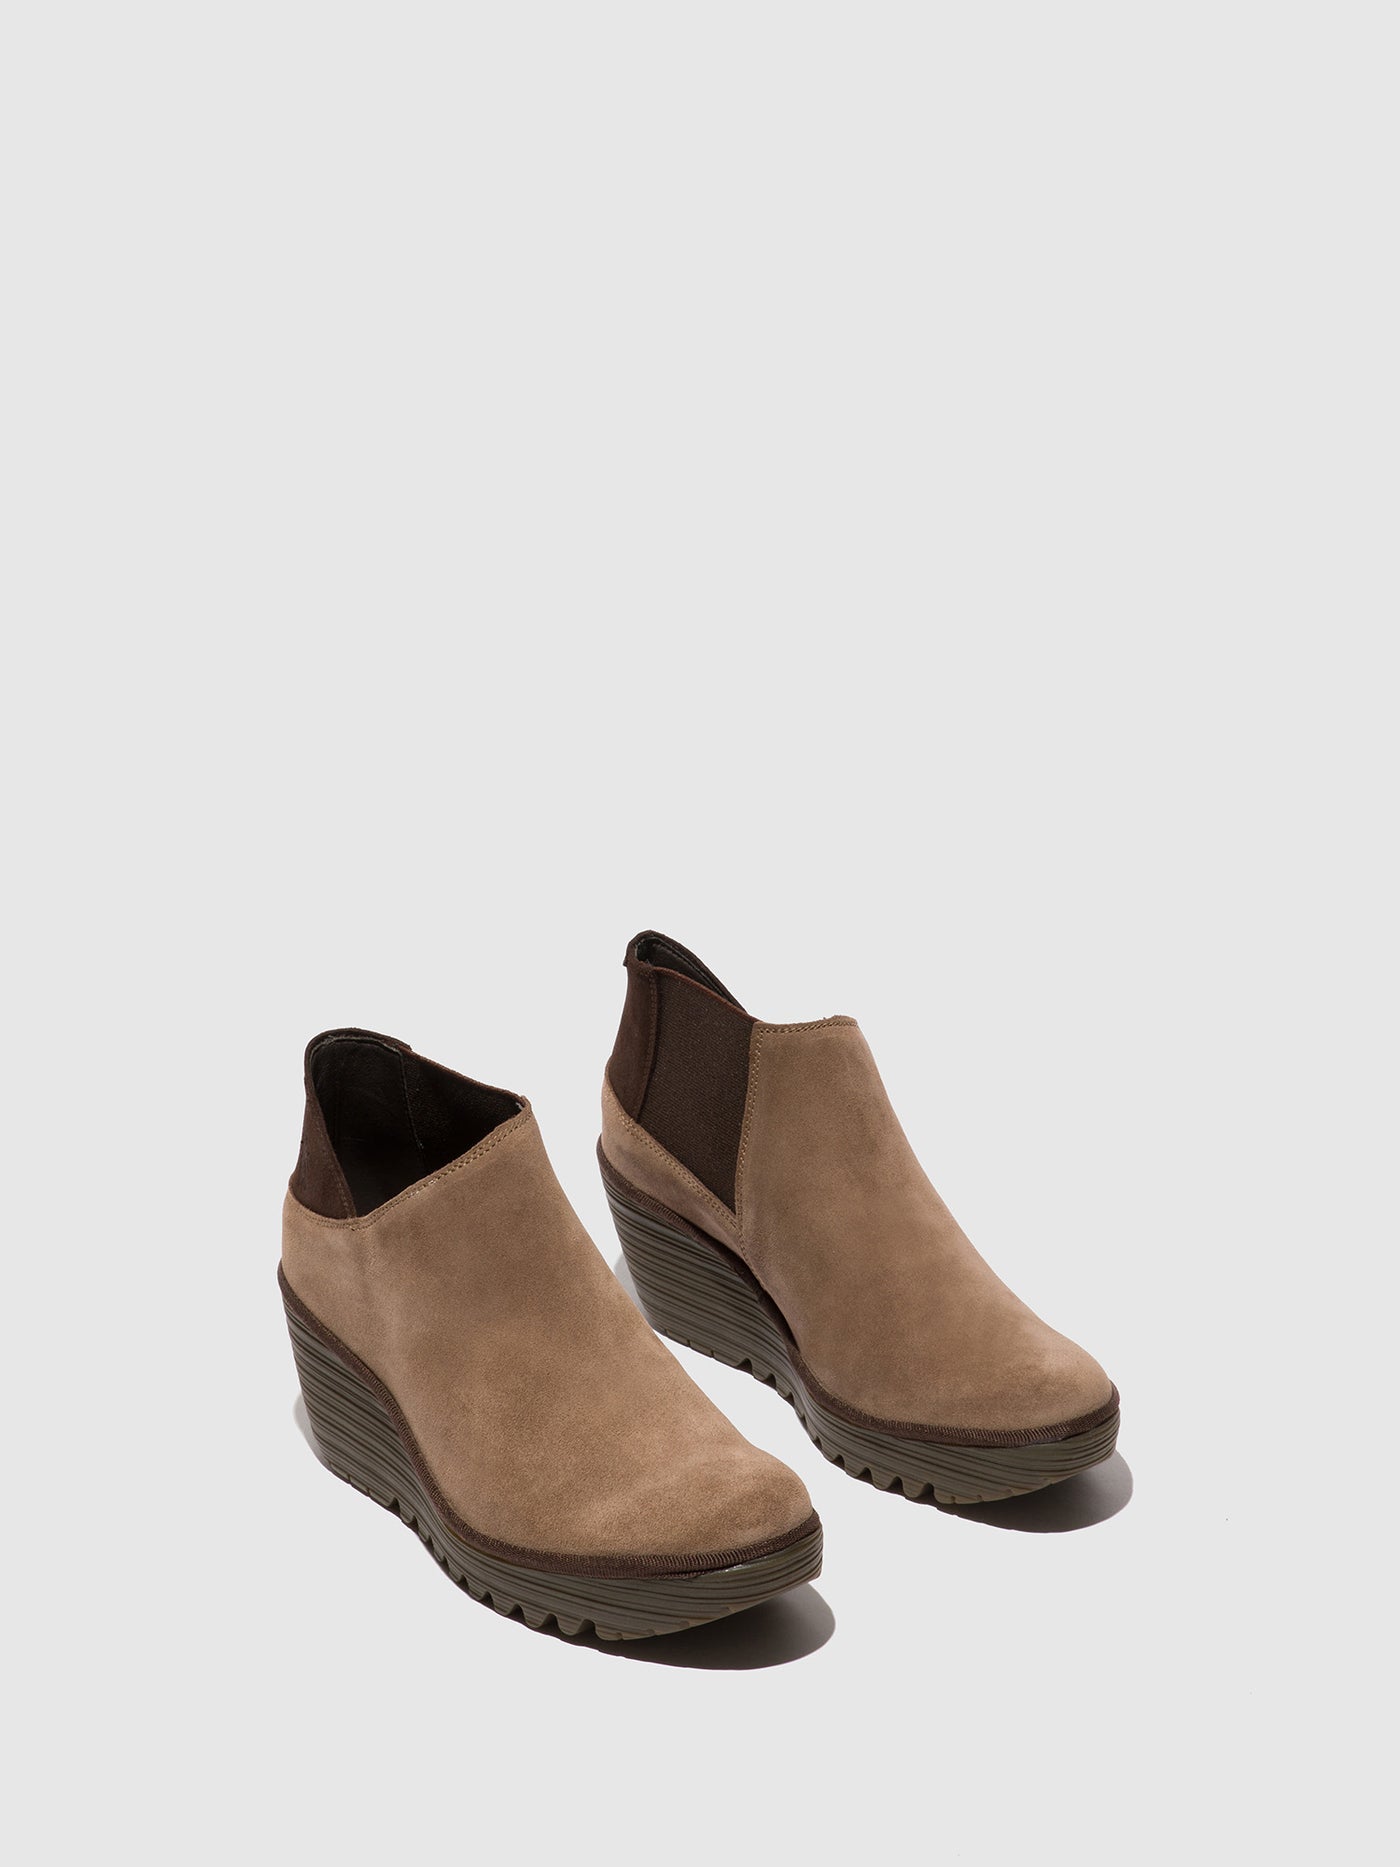 Zip Up Ankle Boots YEGO400FLY TAUPE/EXPRESSO